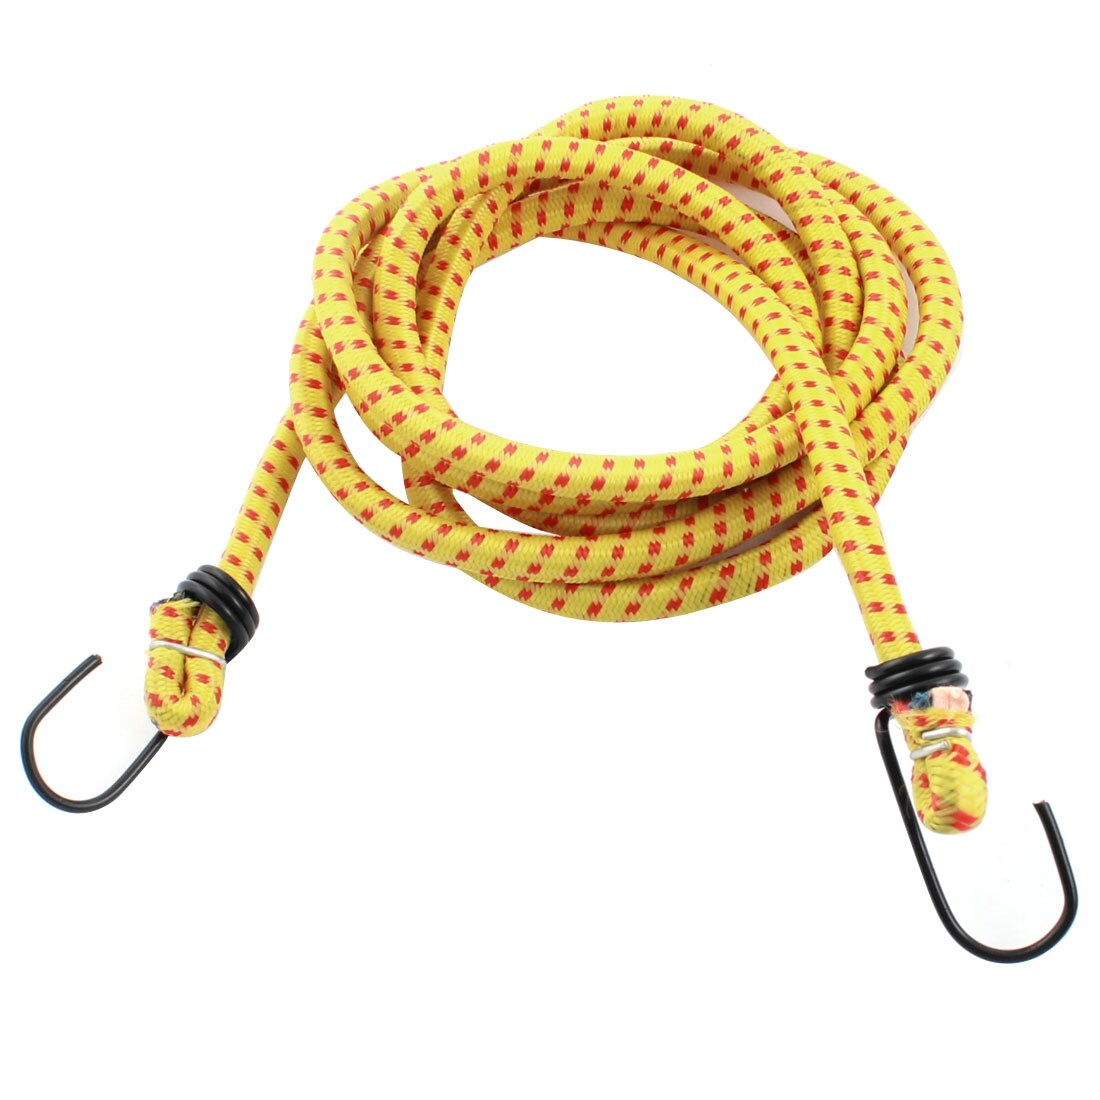 what size bungee cord do i need